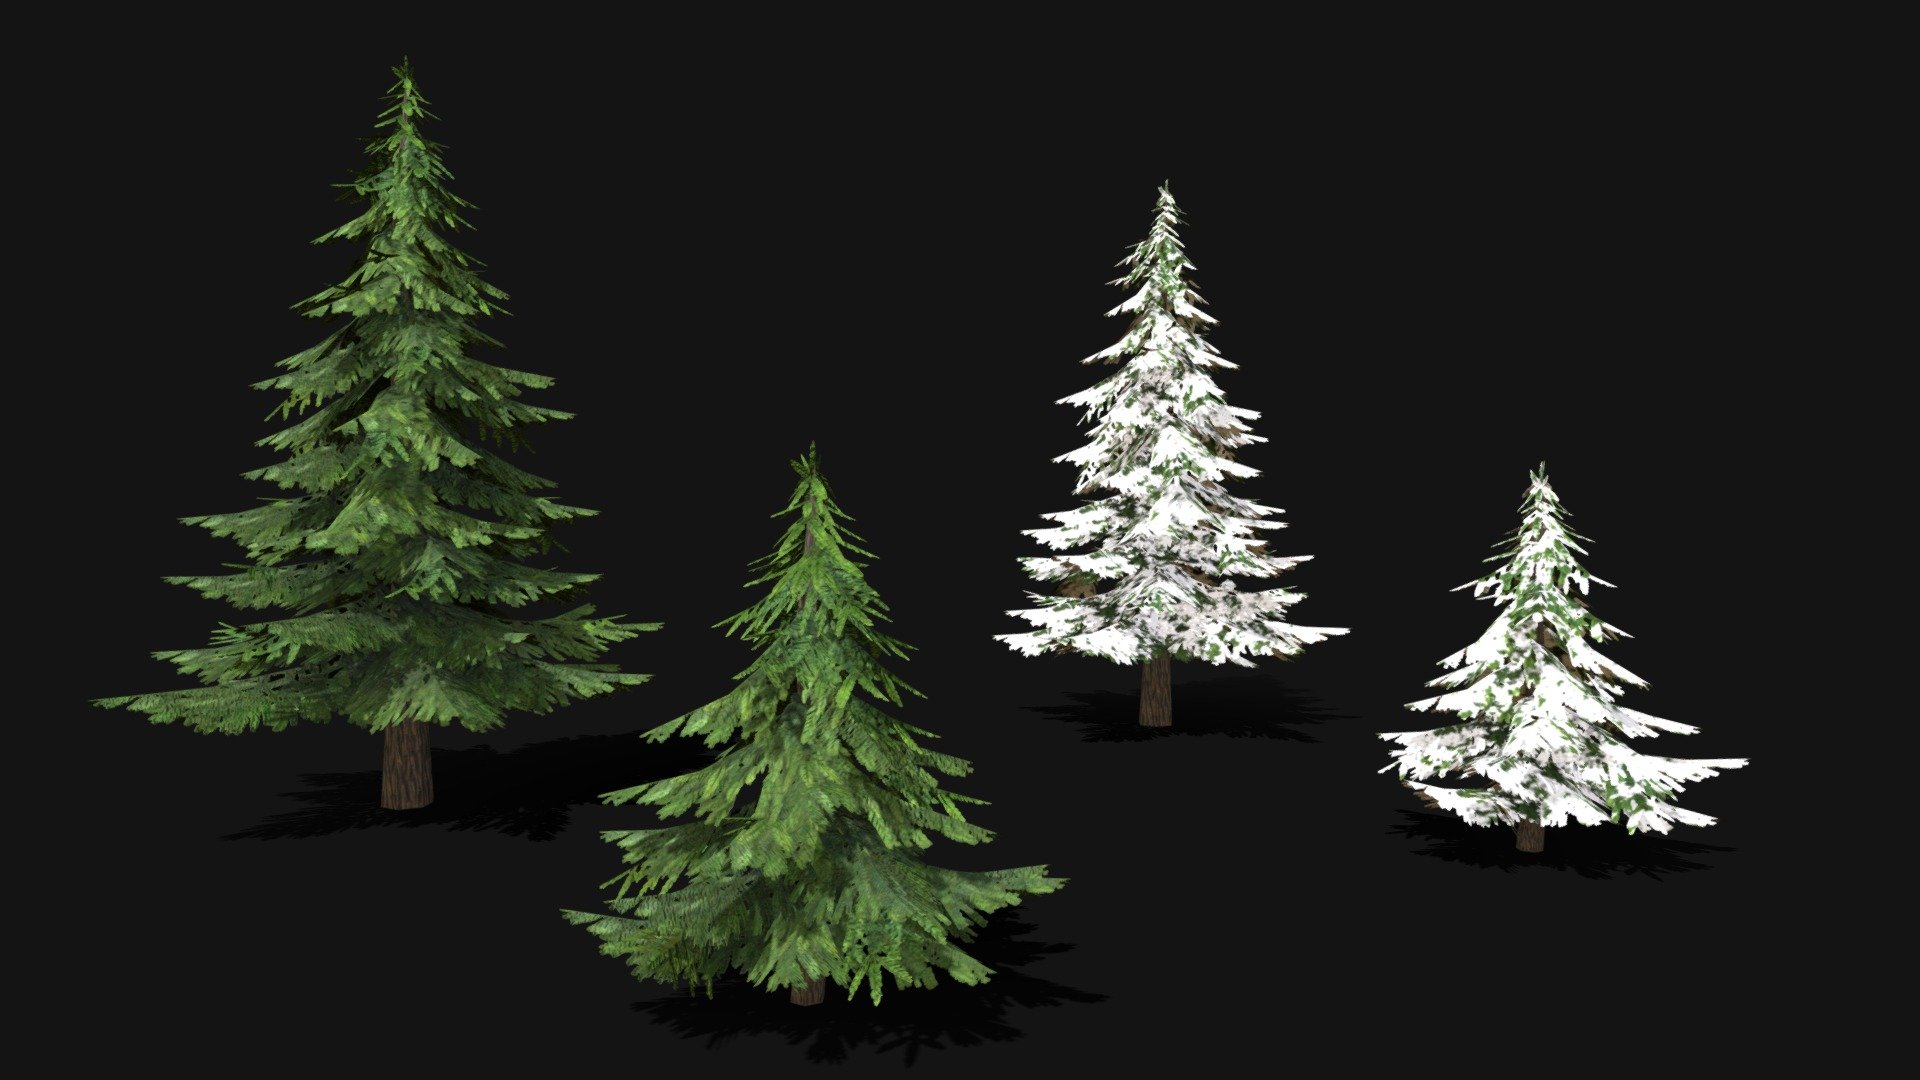 DISCOUNT - separate models are worth $10 each, but buying this model will save you $5!

Looking for stunning 3D models for your game or project? Check out our 3D low poly fir tree models set! Perfect for game development, real-time environments, or background use, these models are optimized for seamless integration into any game engine without sacrificing visual quality. Whether you need to create complex scenes or simple landscapes, these models will elevate your project to the next level. Don’t miss out on this opportunity to enhance your project with our high-quality 3D models!

Big Fir Tree:
774 polygons
1141 vertices
2 mesh objects
Snow version of the texture

Small Fir Tree:
376 polygons
578 vertices
2 mesh objects
Snow version of the texture

Both models are centered at 0,0,0 origin.
All textures are in 512 x 512 resolution (for even better game optimization).
Models have real-world scales. Measurement unit used for models: Meters.

Good Luck! - Fir Trees LowPoly - Buy Royalty Free 3D model by Xylla 3d model